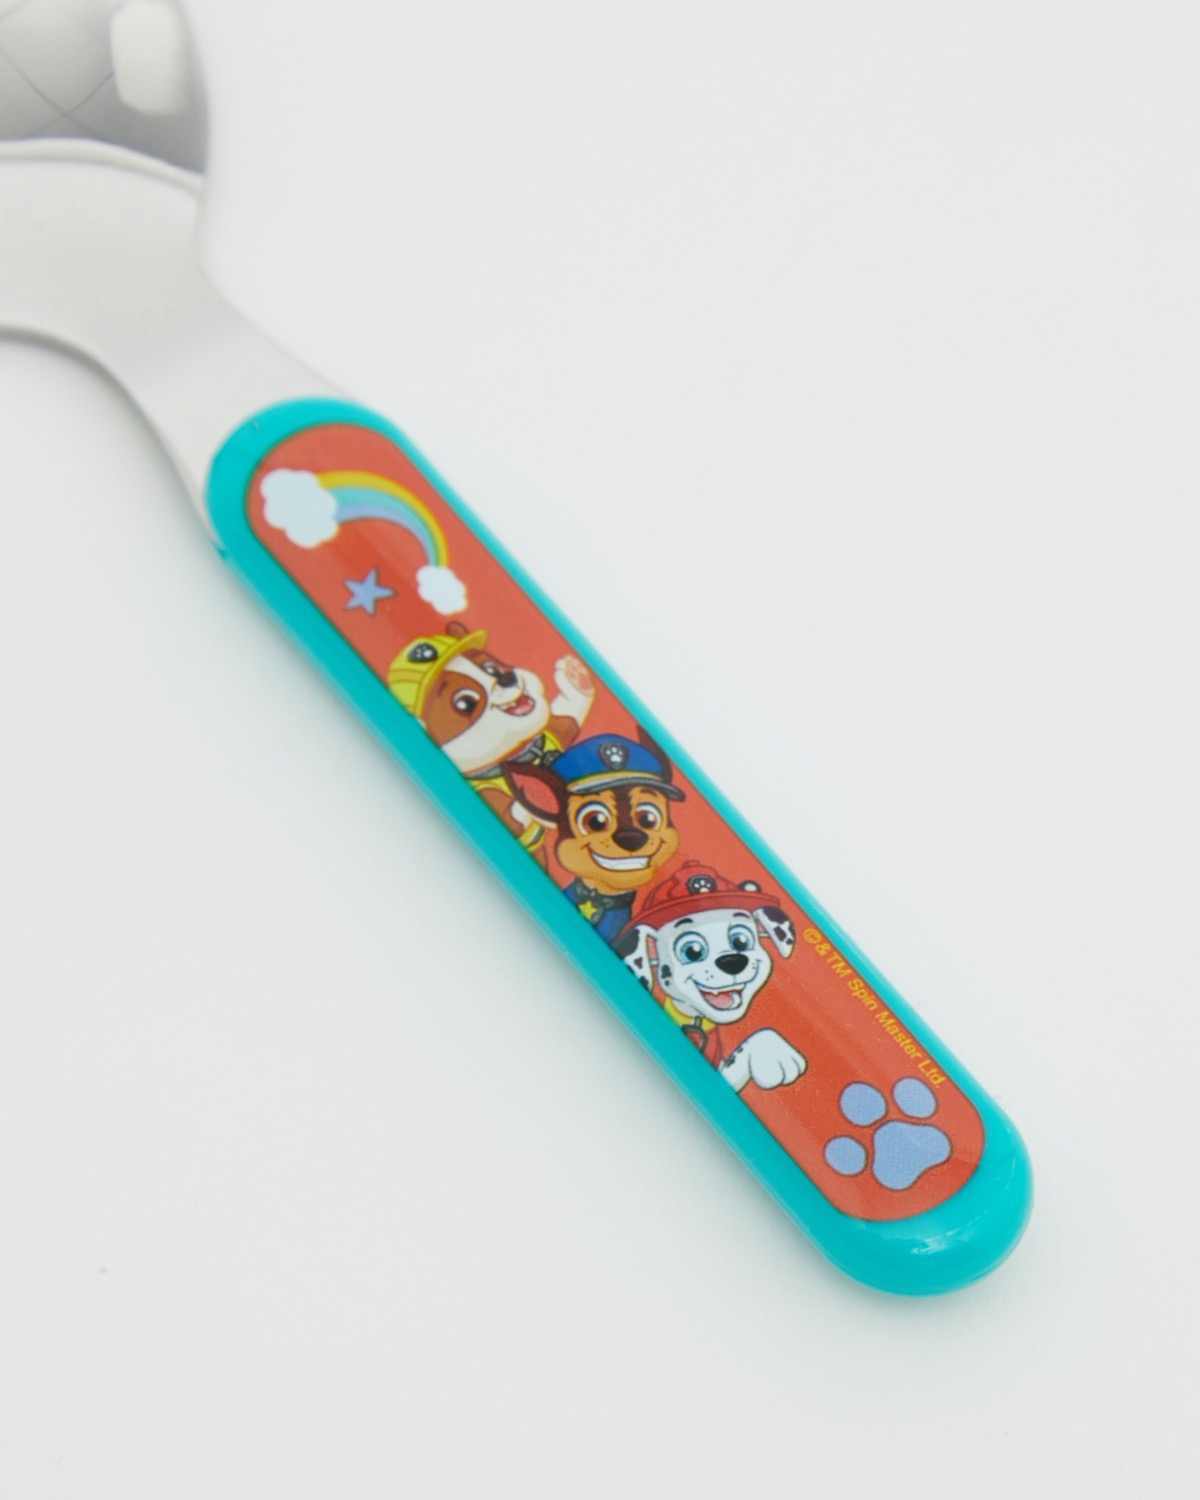 https://dunnes.btxmedia.com/pws/client/images/catalogue/products/6270529/zoom/6270529_b-paw-patrol_1.jpg